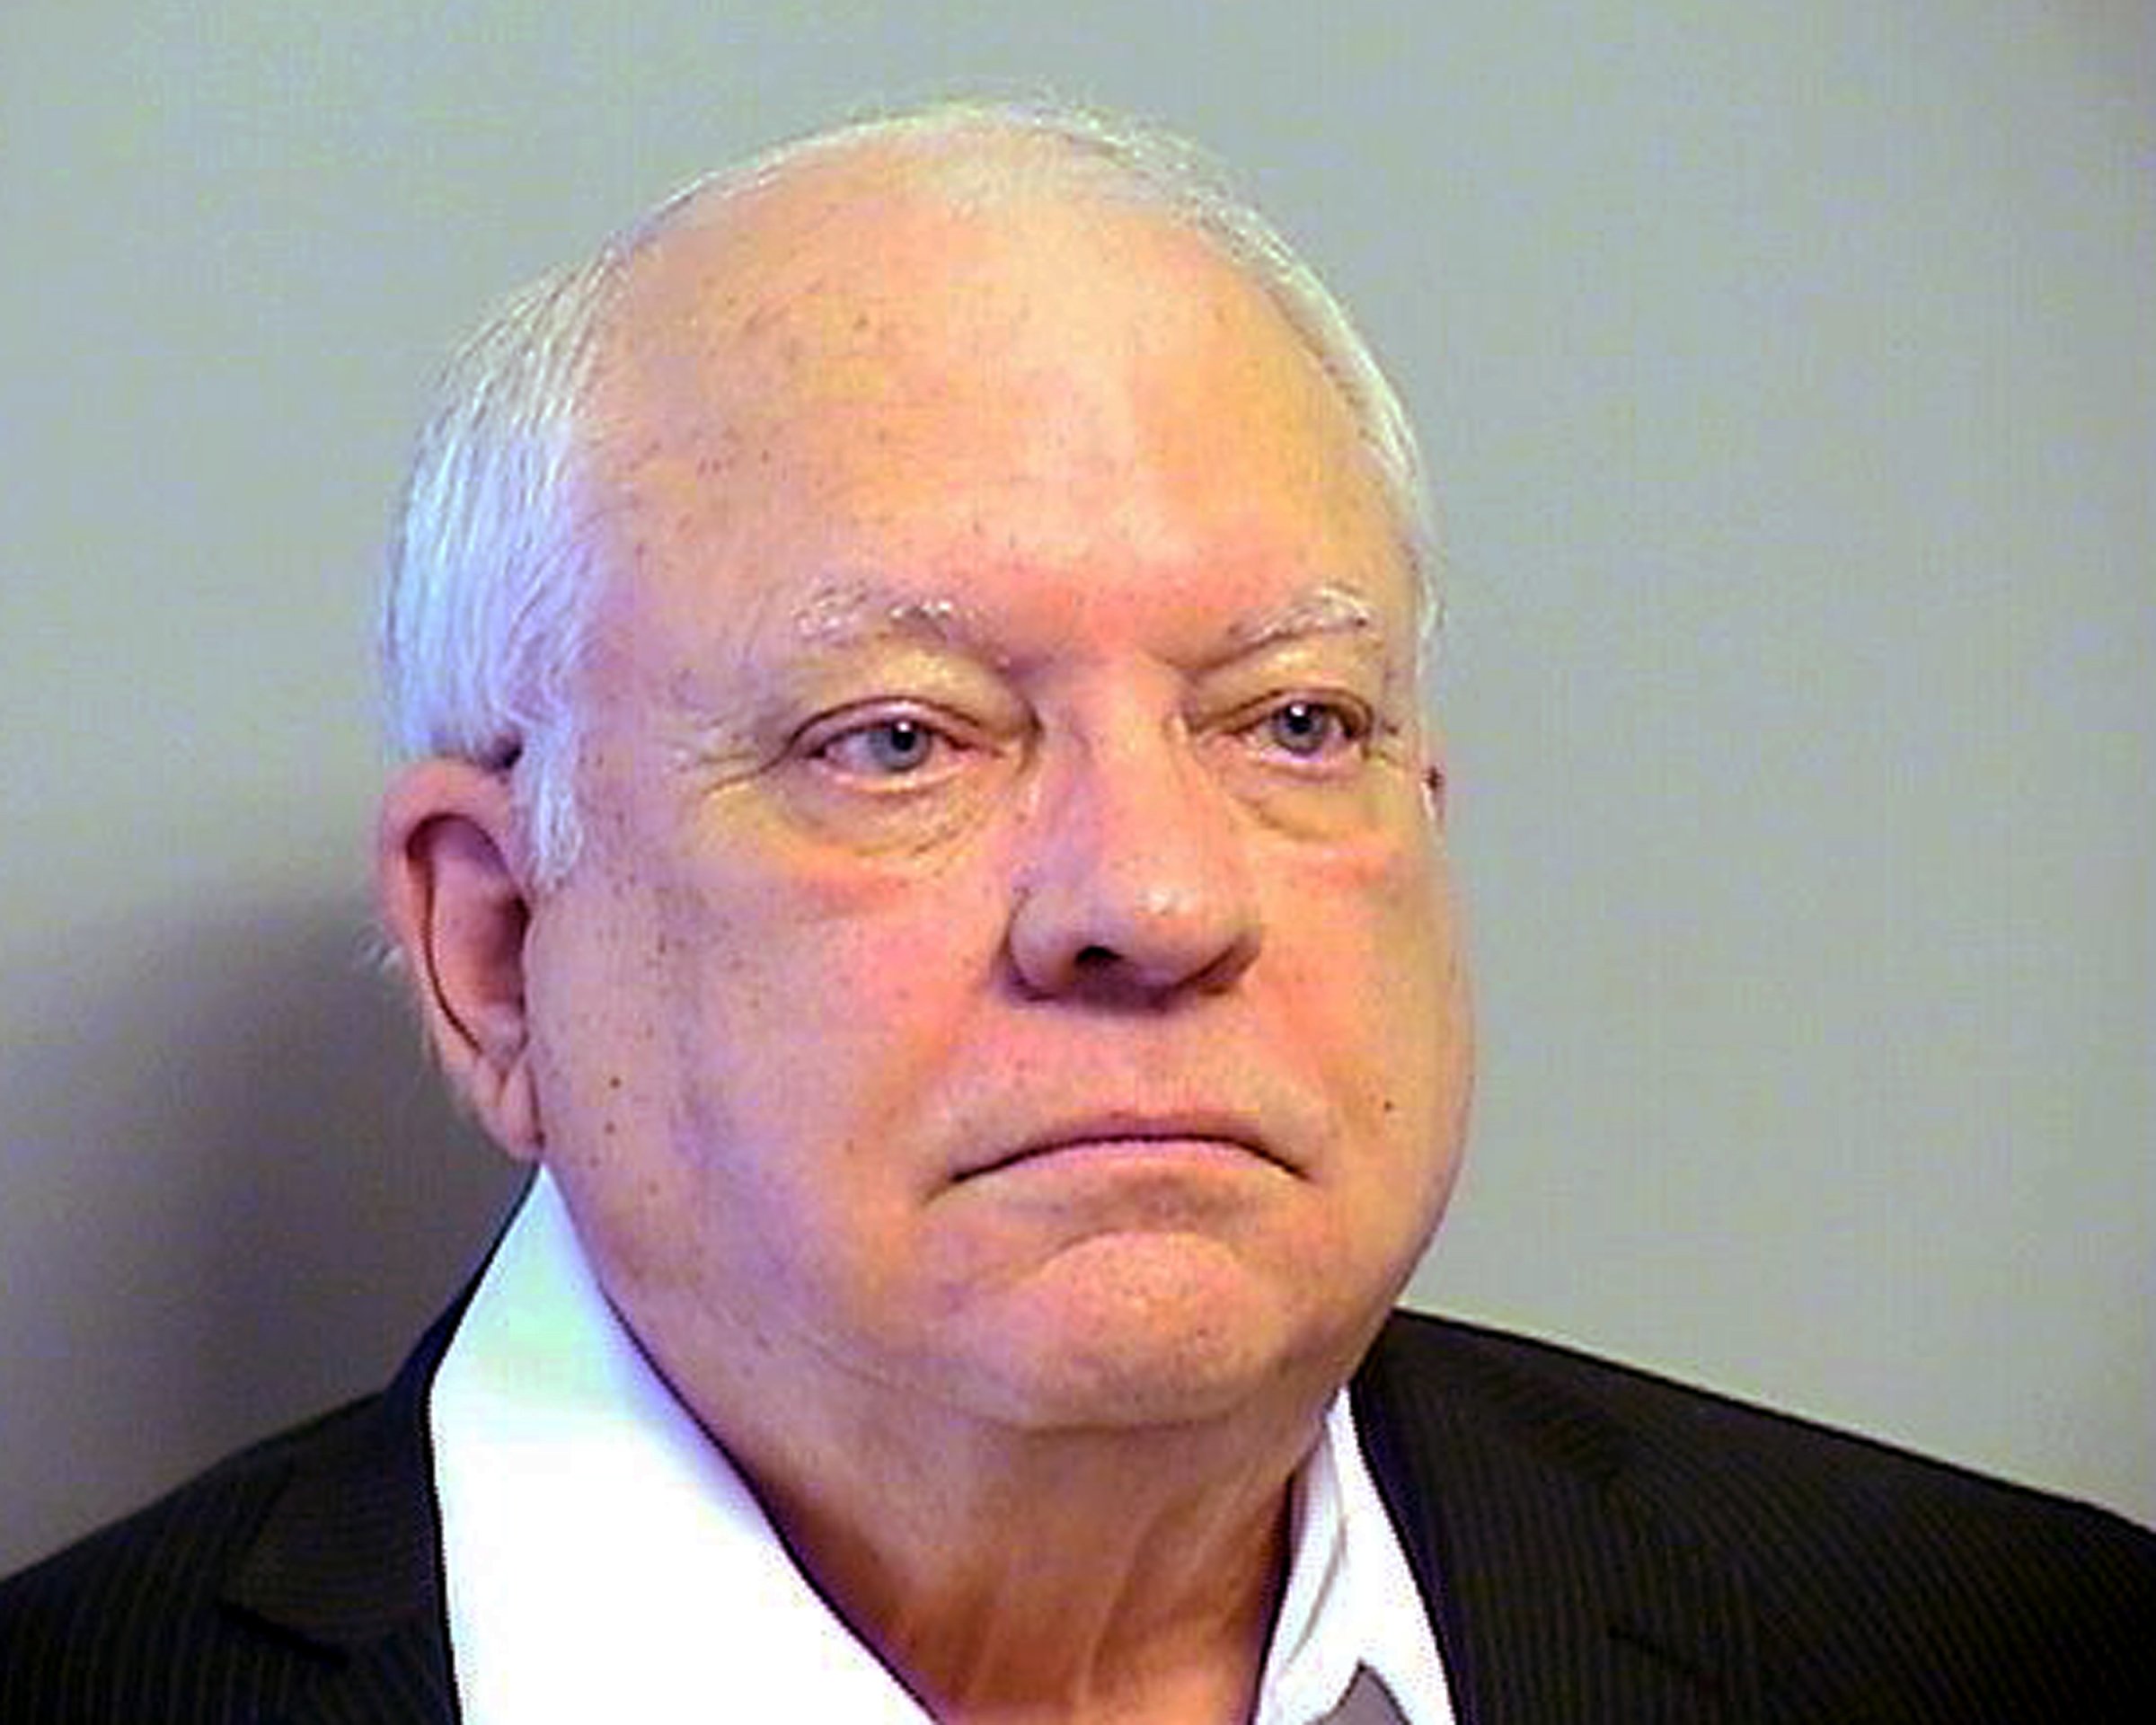 Robert Bates. The 73-year-old Oklahoma reserve sheriff's deputy, who authorities said fatally shot a suspect after confusing his stun gun and handgun, was booked into the county jail on a manslaughter charge in Tulsa, Okla. on April 14, 2015.